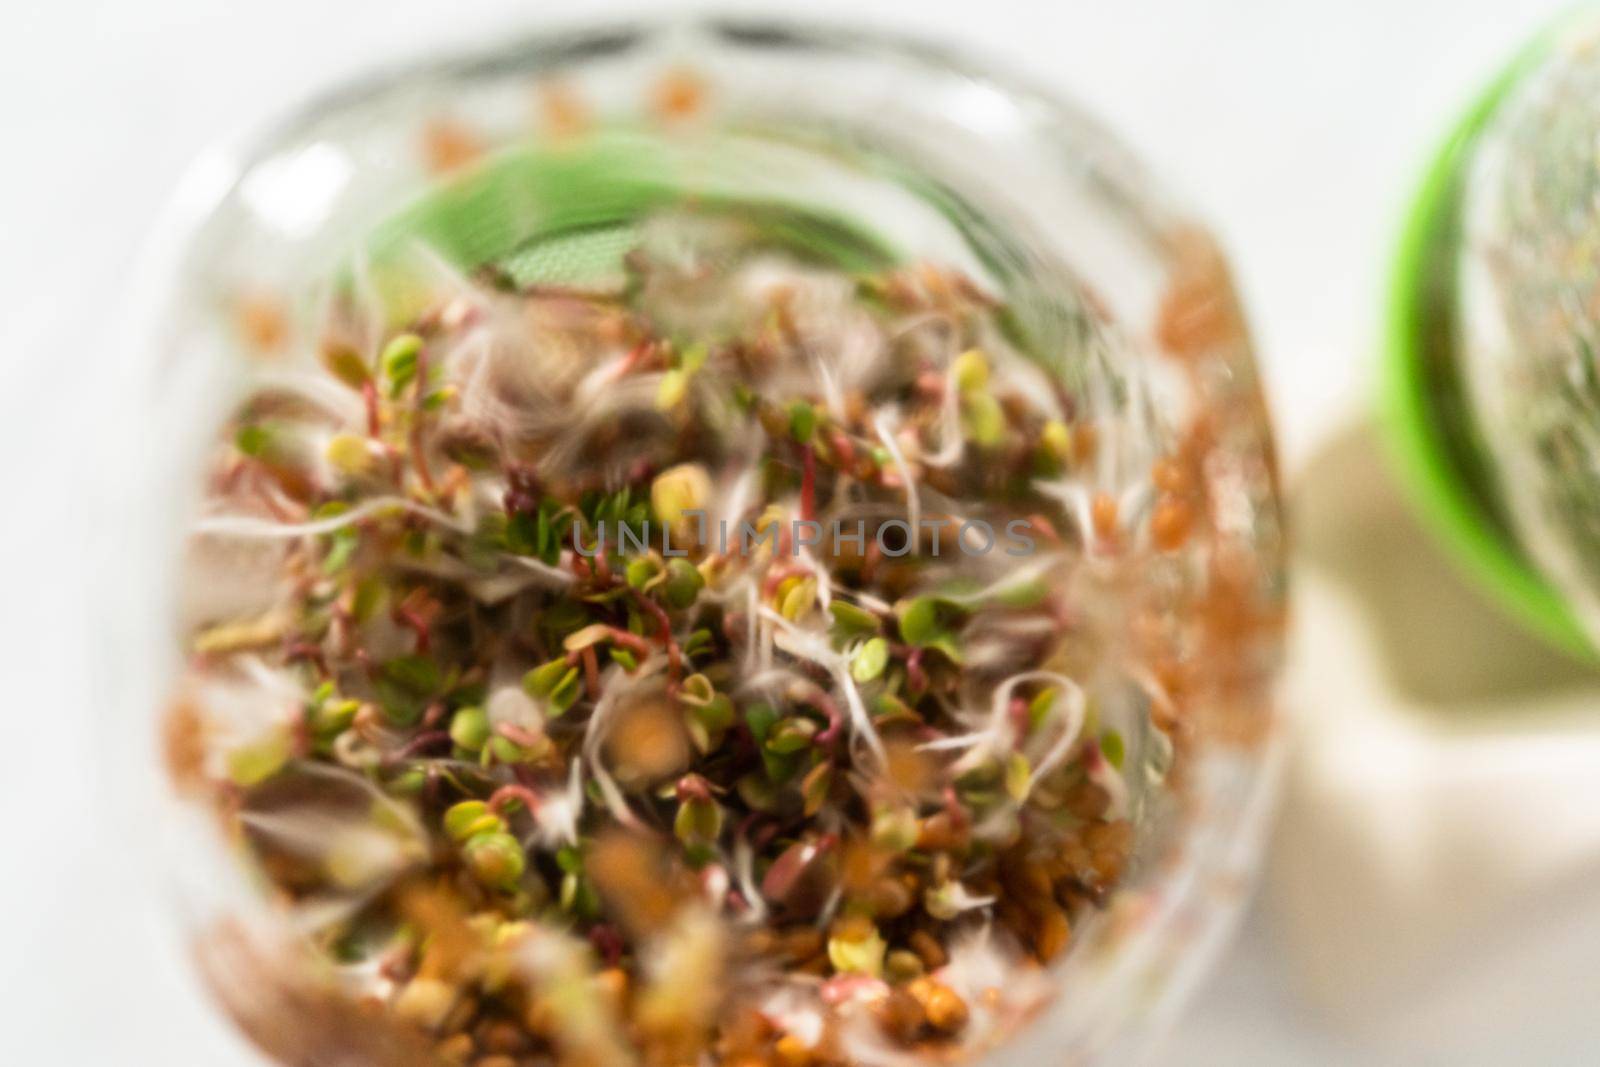 Day 6. Growing organic sprouts in a mason jar with sprouting lid on the kitchen counter.